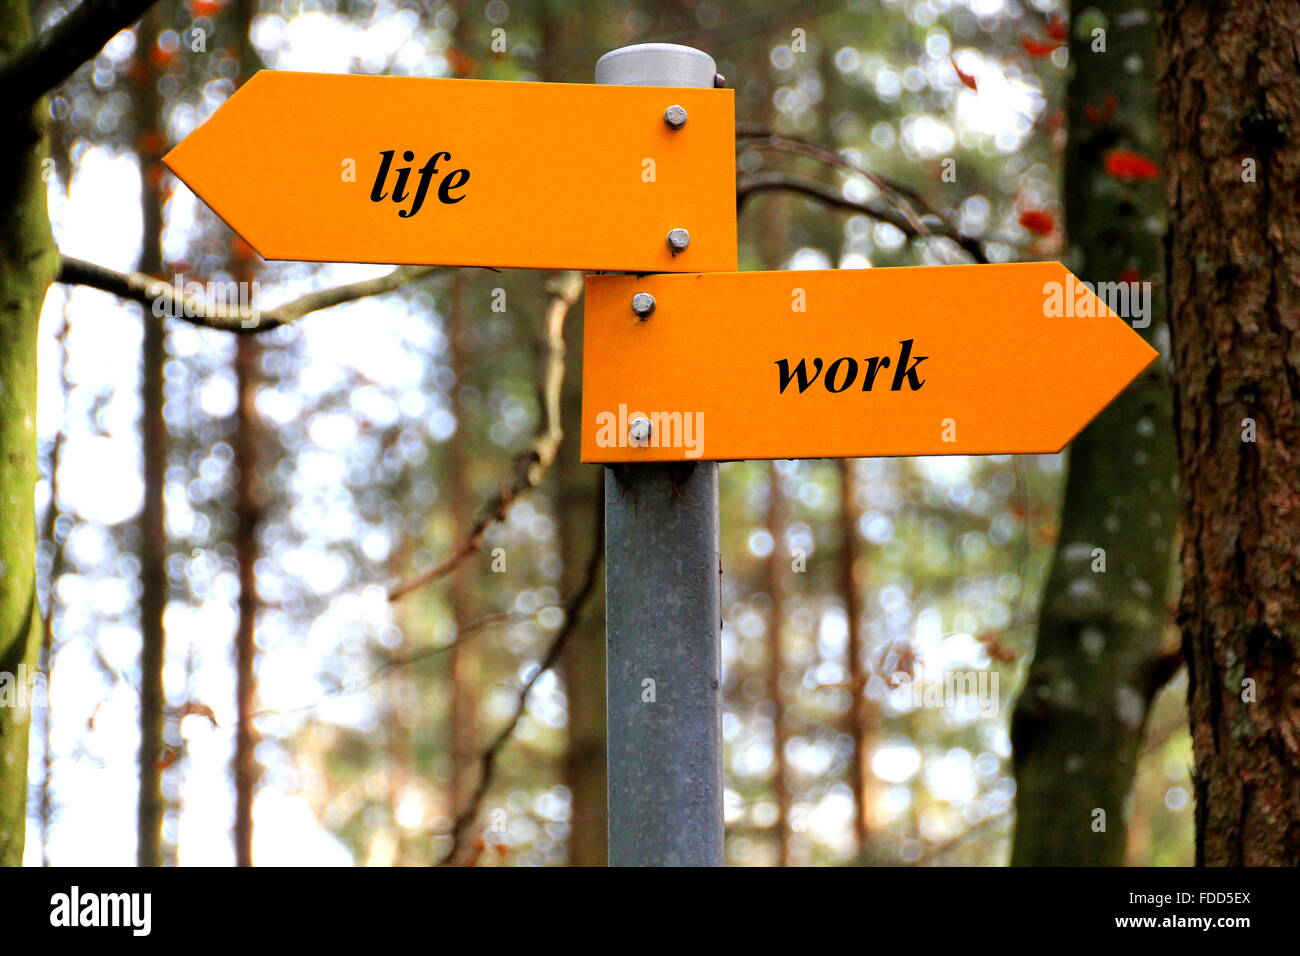 life and work written on a yellow direction sign Stock Photo